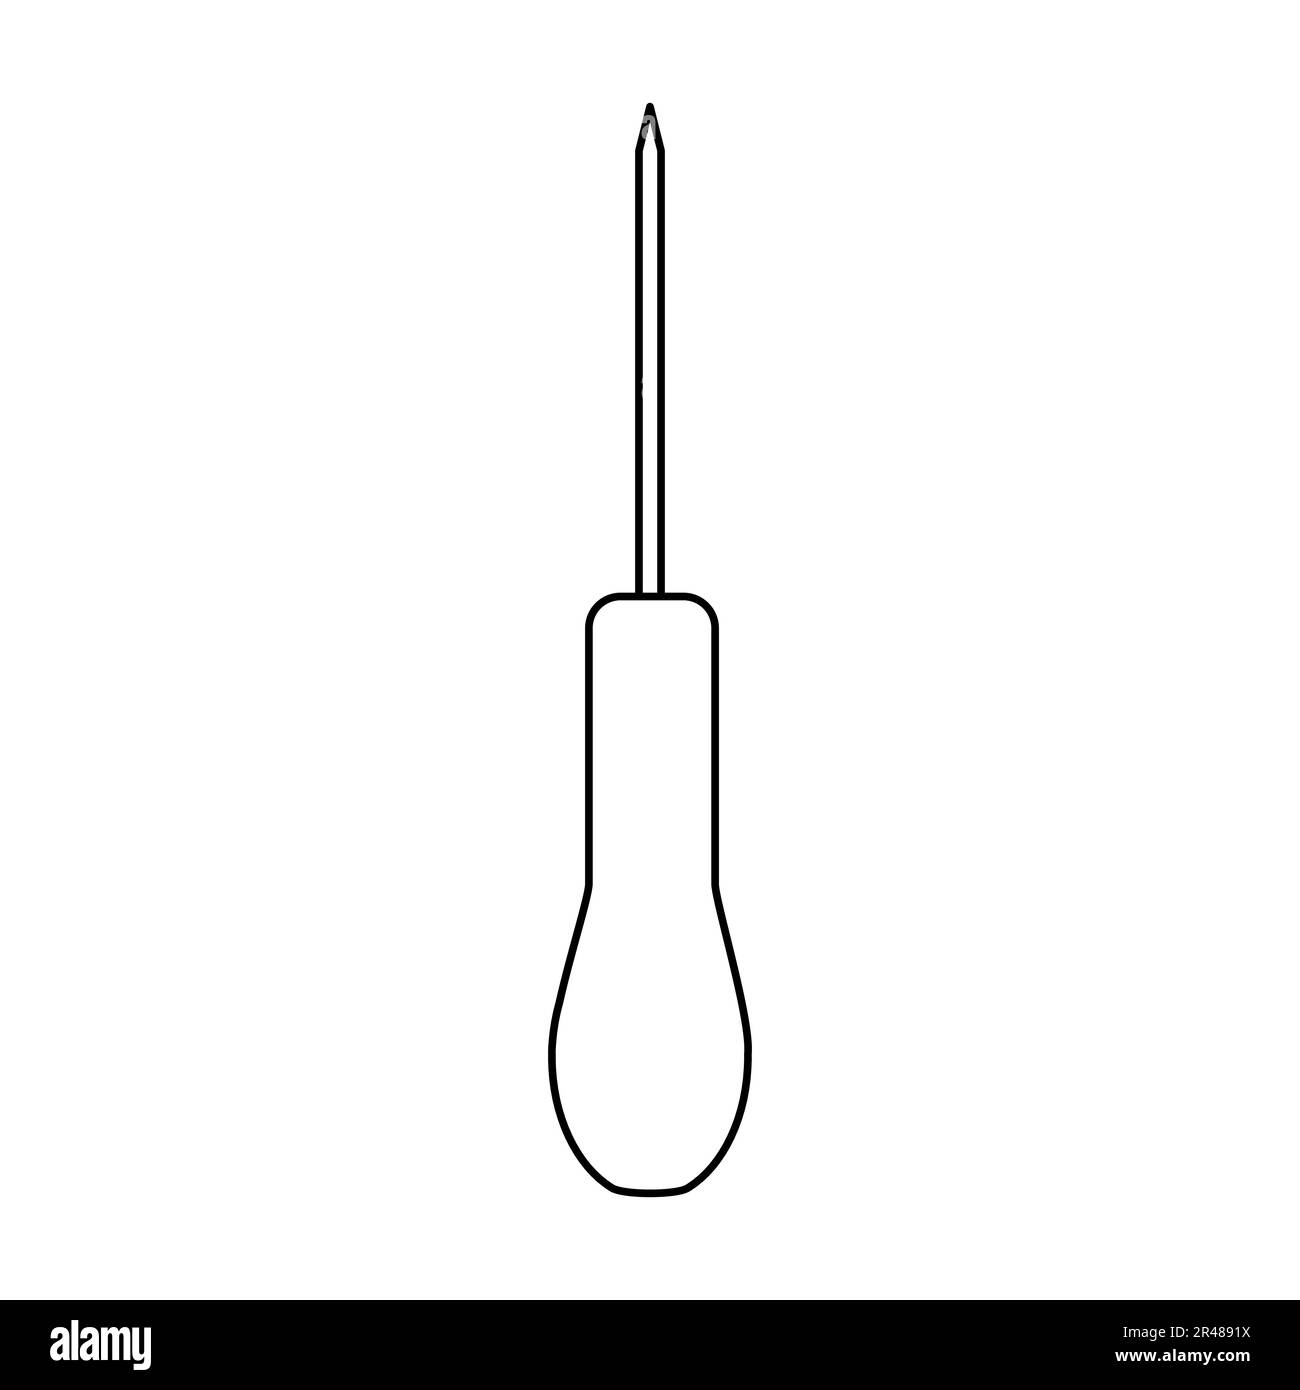 Set Awl Tool, Sewing Thread on Spool, Mannequin and Crochet Hook on  Seamless Pattern. Vector Stock Vector - Illustration of isolated, sewing:  229419763